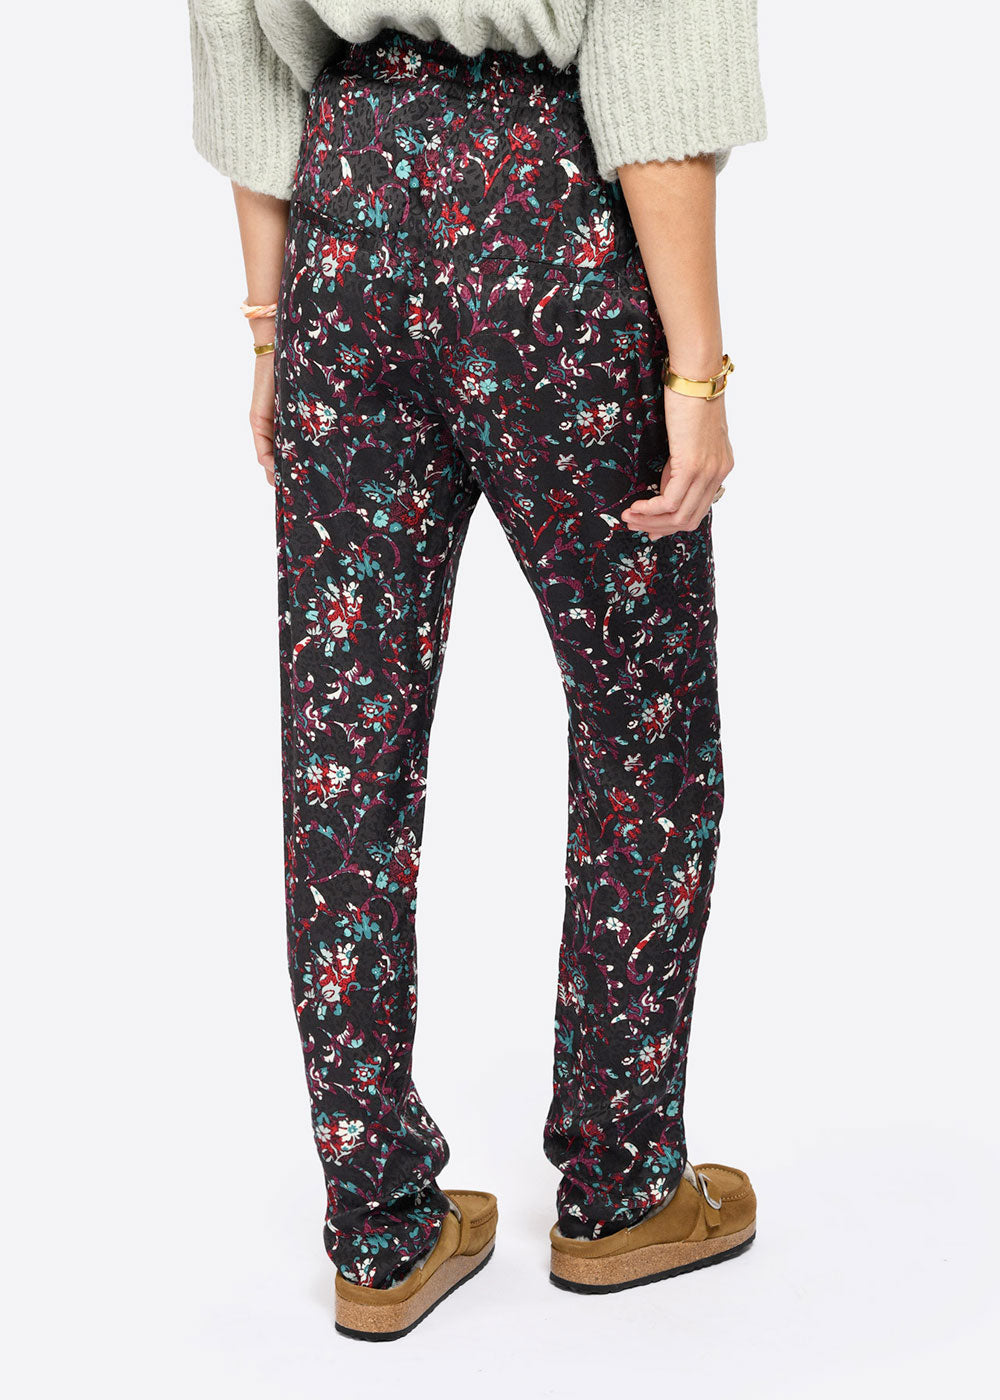 Isabel Marant Bowie Pant – adorno limited